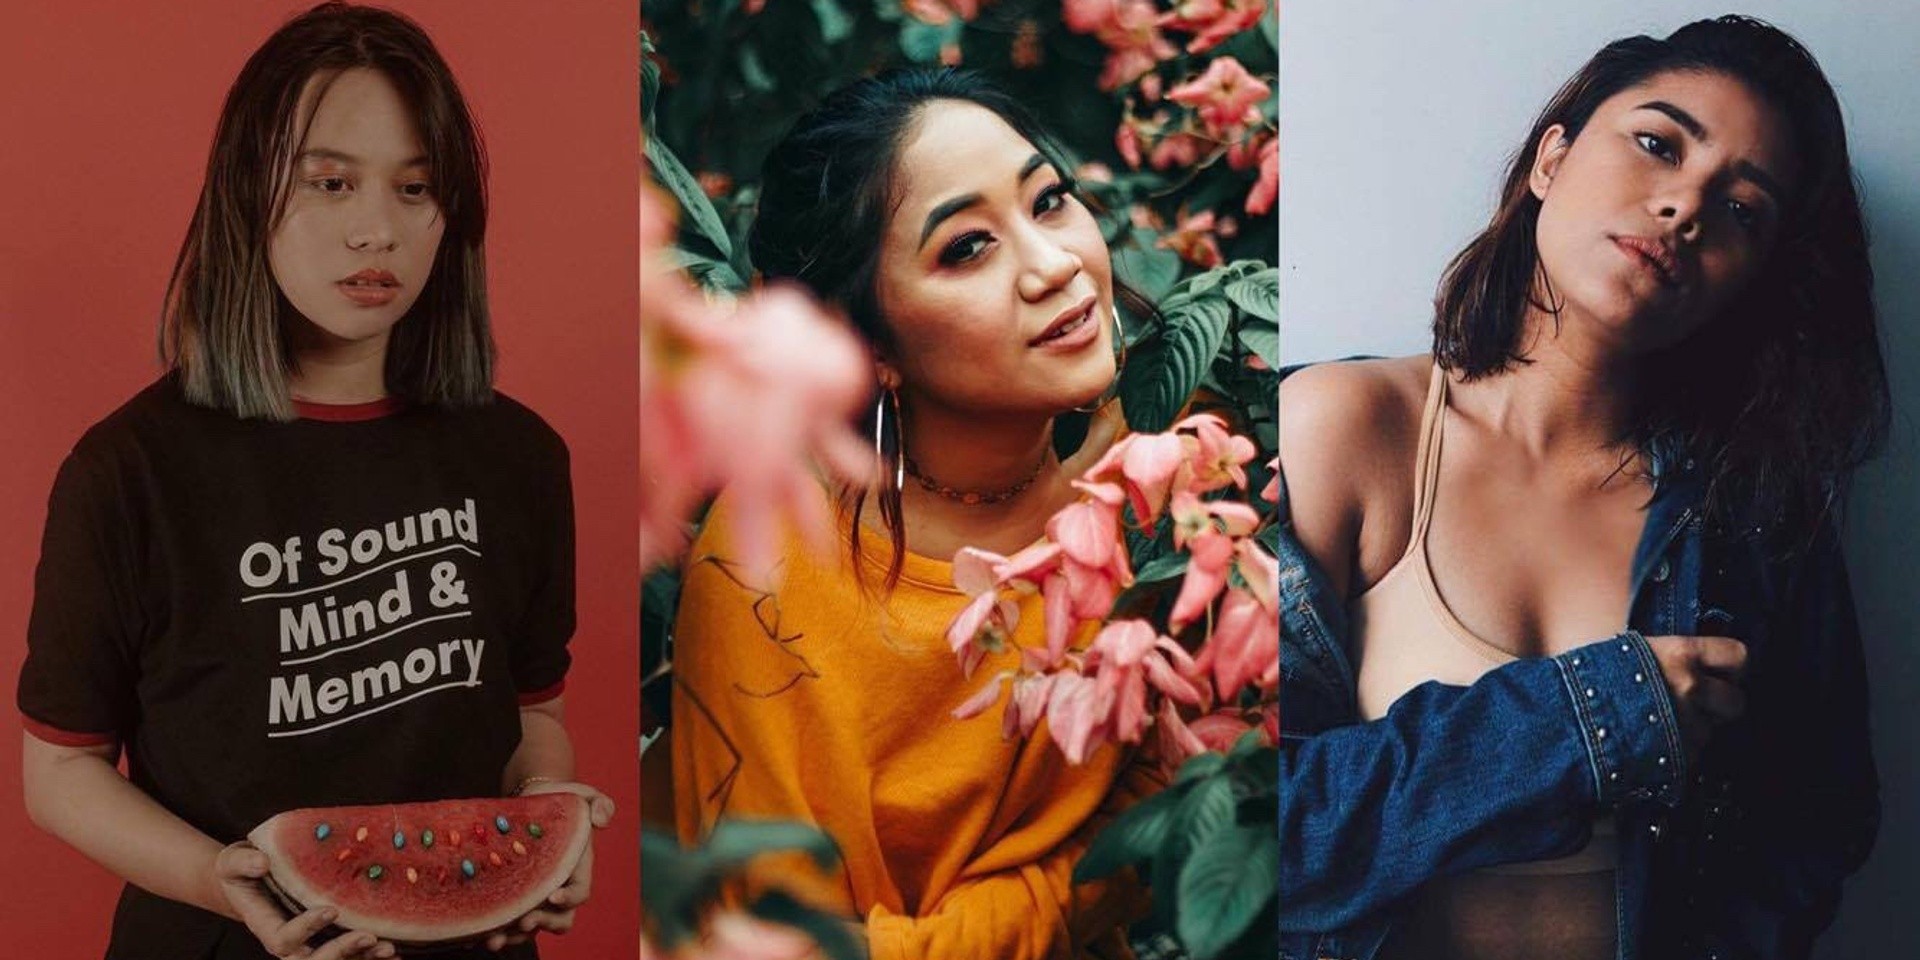 Stages Sessions are having a special Christmas show with Reese Lansangan, Coeli, Keiko Necesario, and more